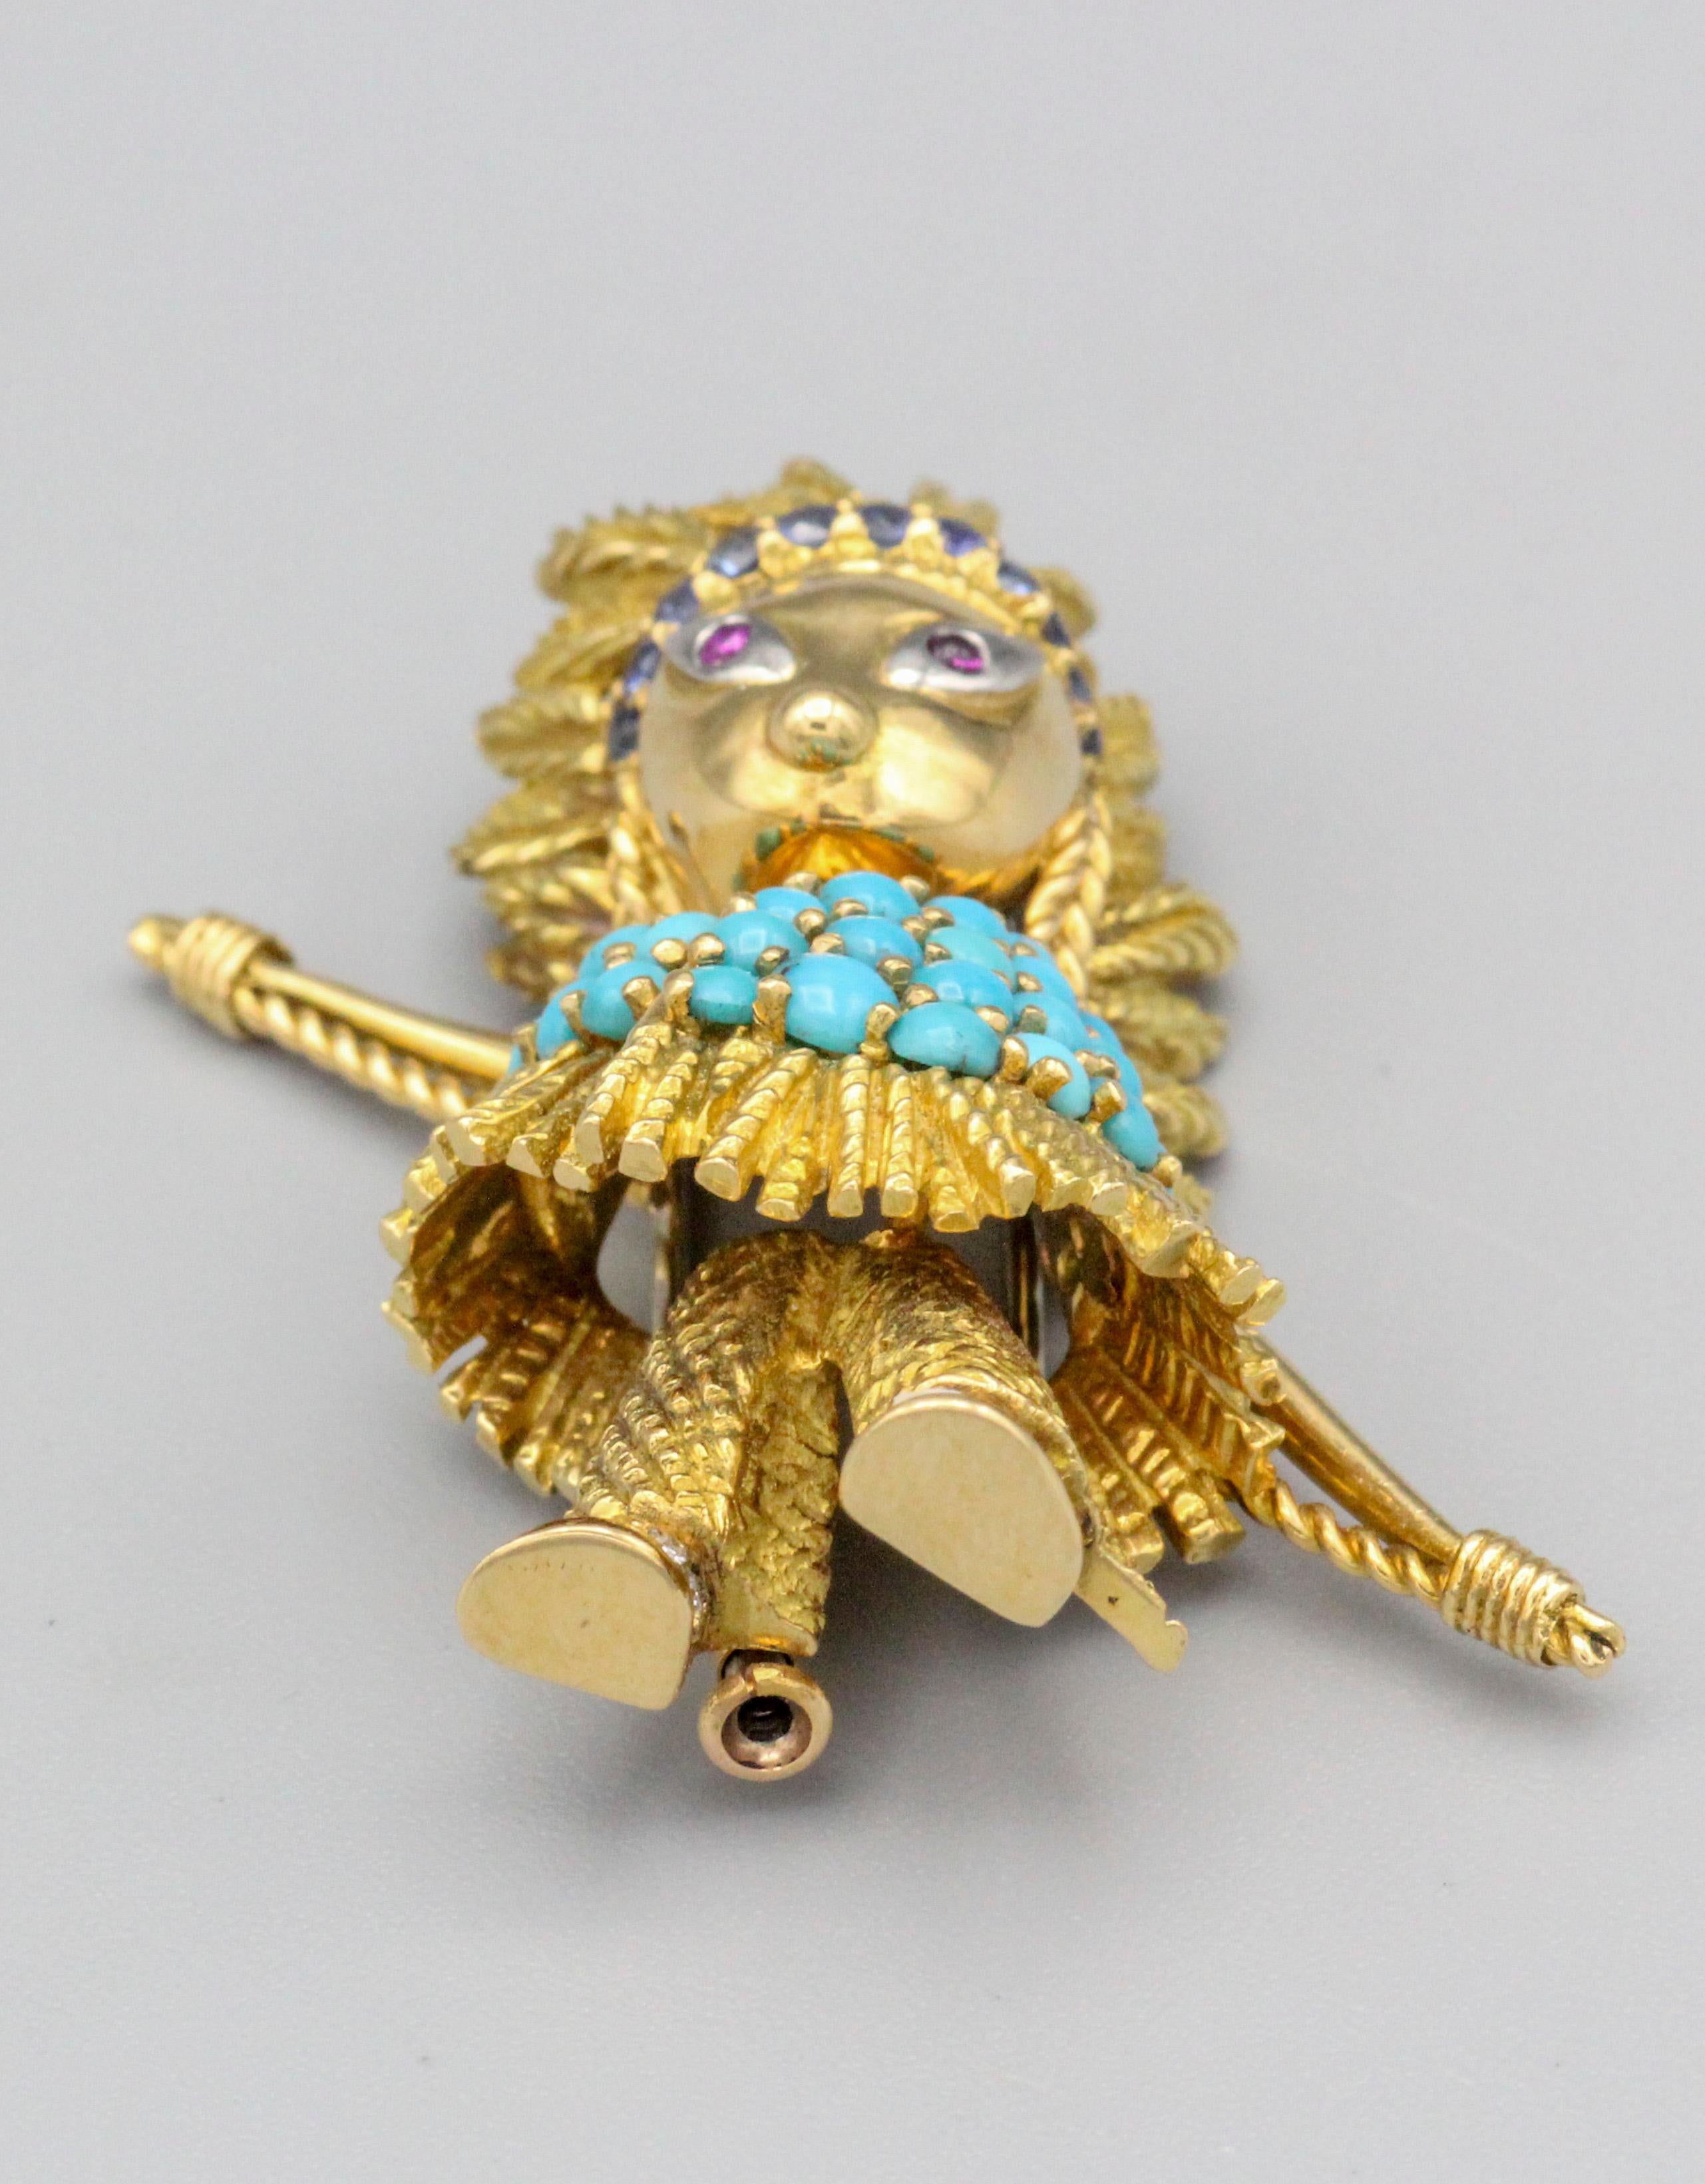 A Legacy on Your Lapel: Rare Cartier Brooch Depicts American Indian Hunter

This exceptional vintage brooch from Cartier is a captivating fusion of artistry, history, and precious materials. Crafted in luxurious 18-karat yellow gold, it depicts a